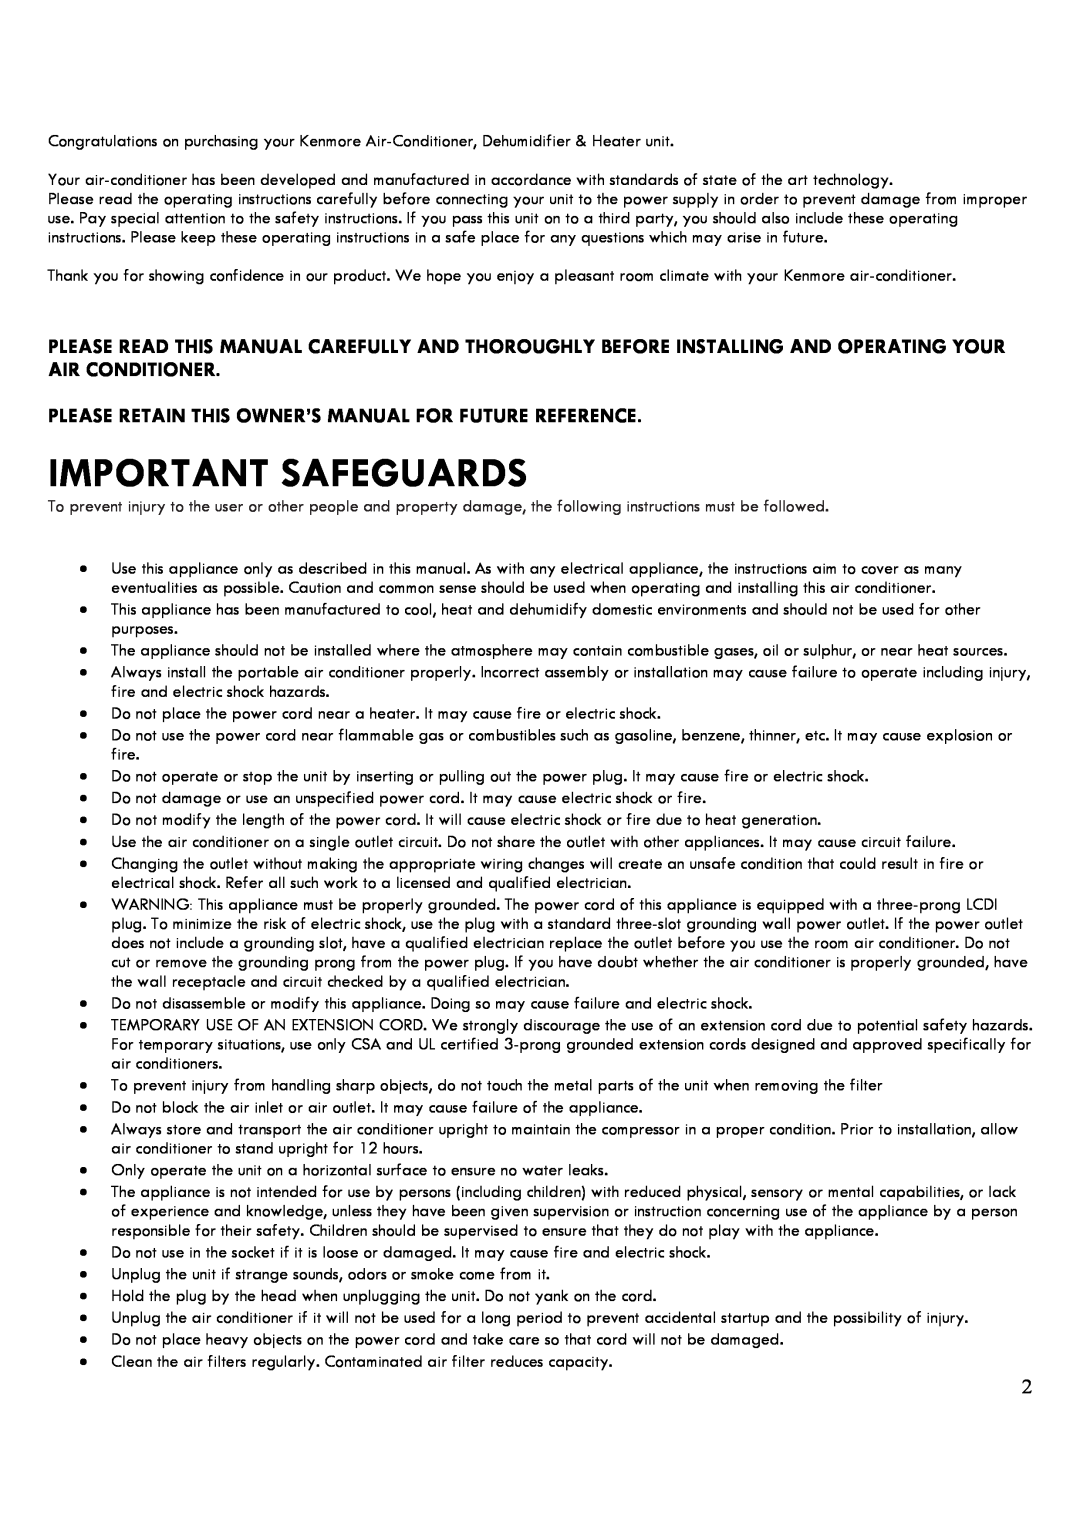 Kenmore 35132 manual Important Safeguards 